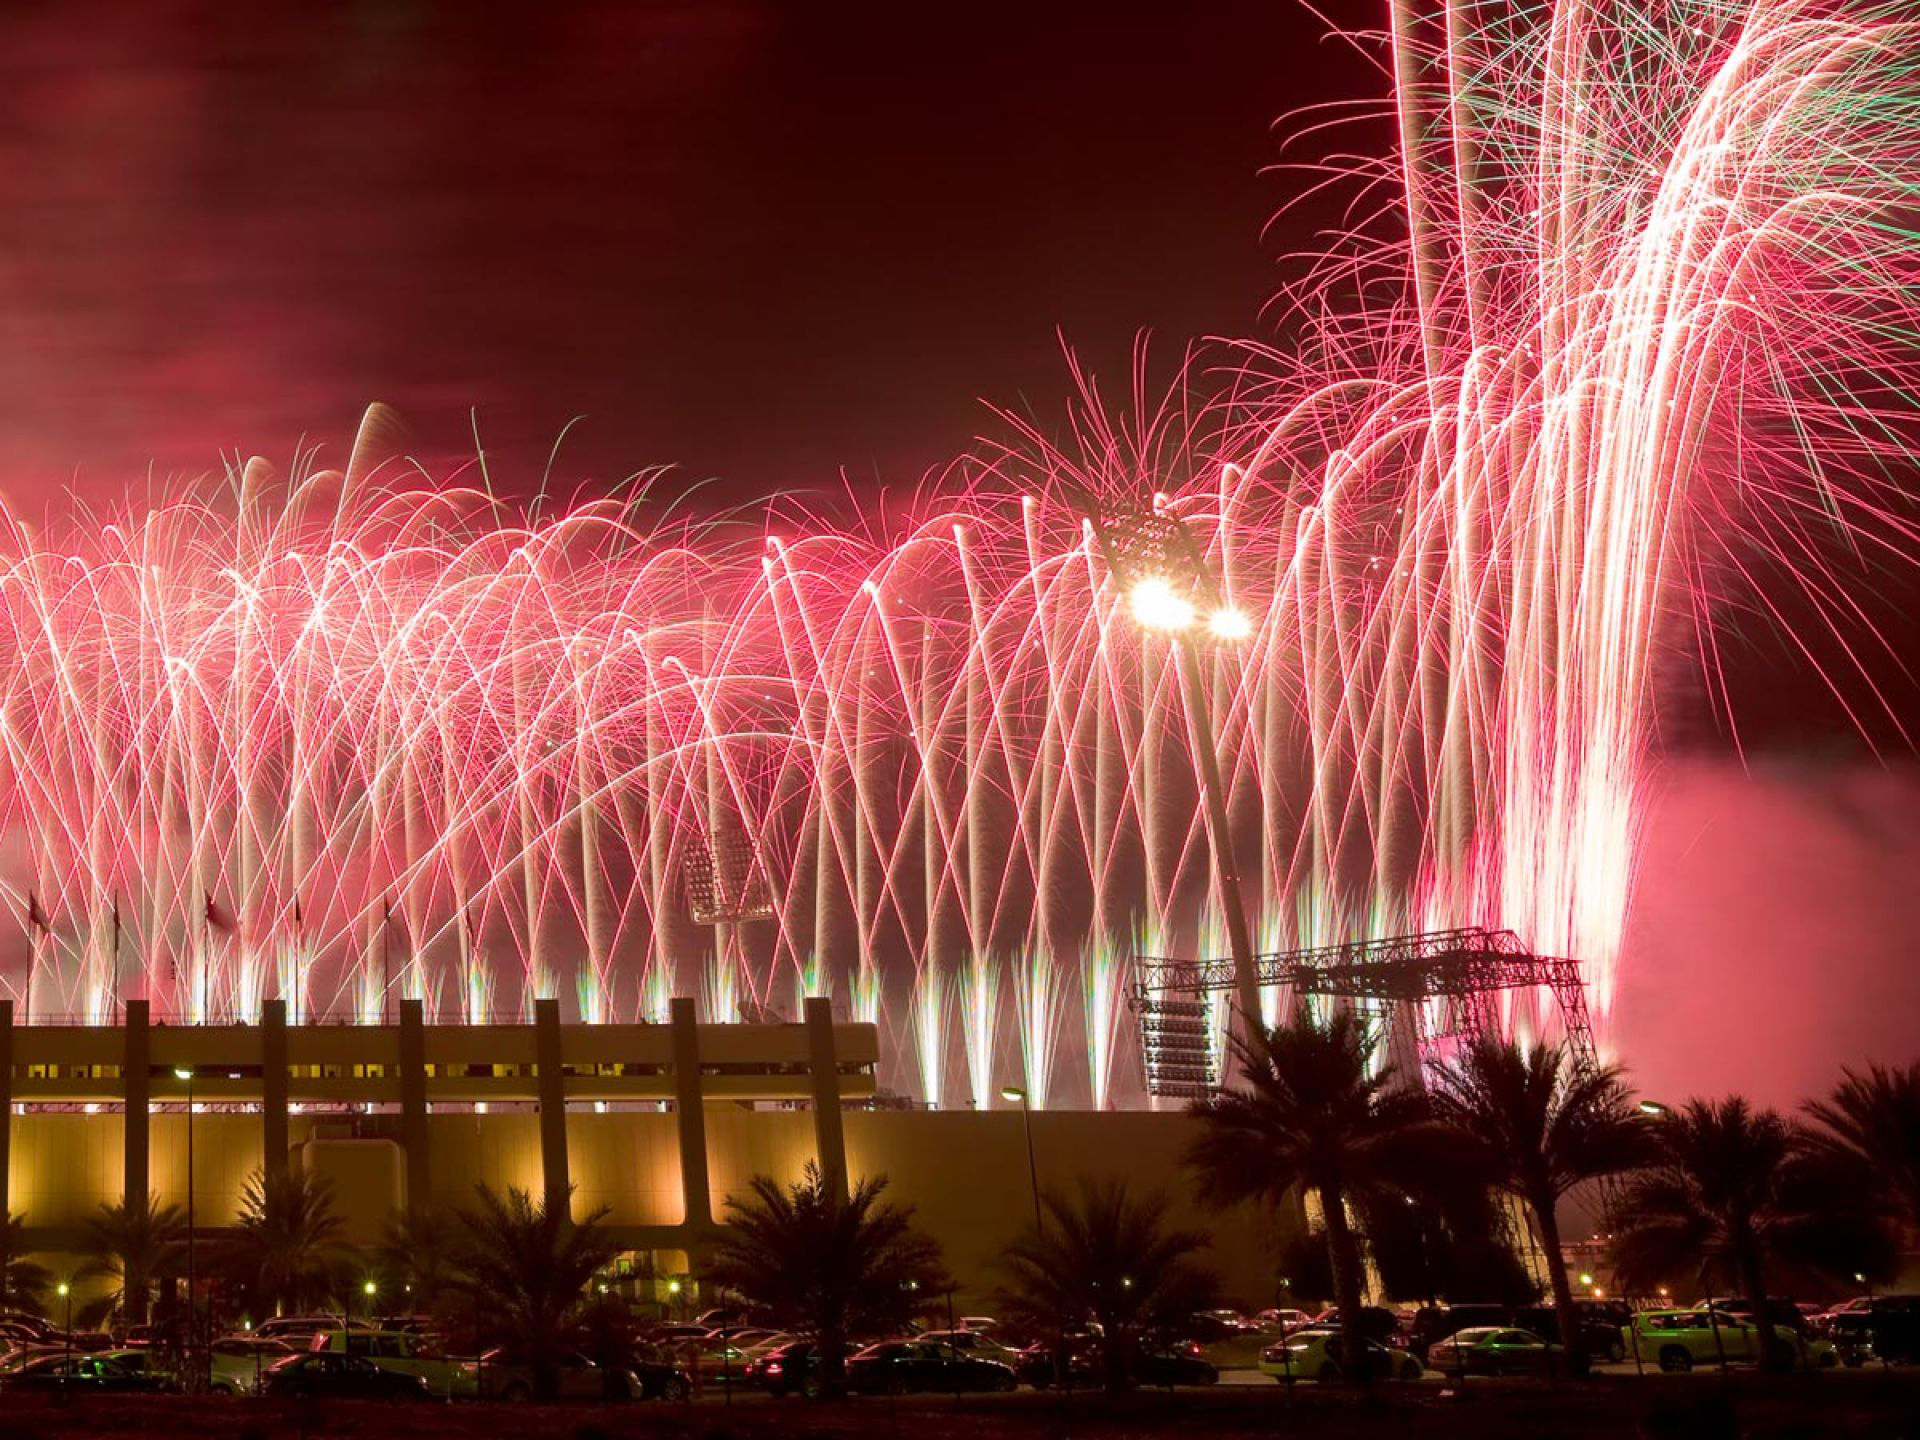 Places to celebrate New Year in the Middle East - Muscat, Oman